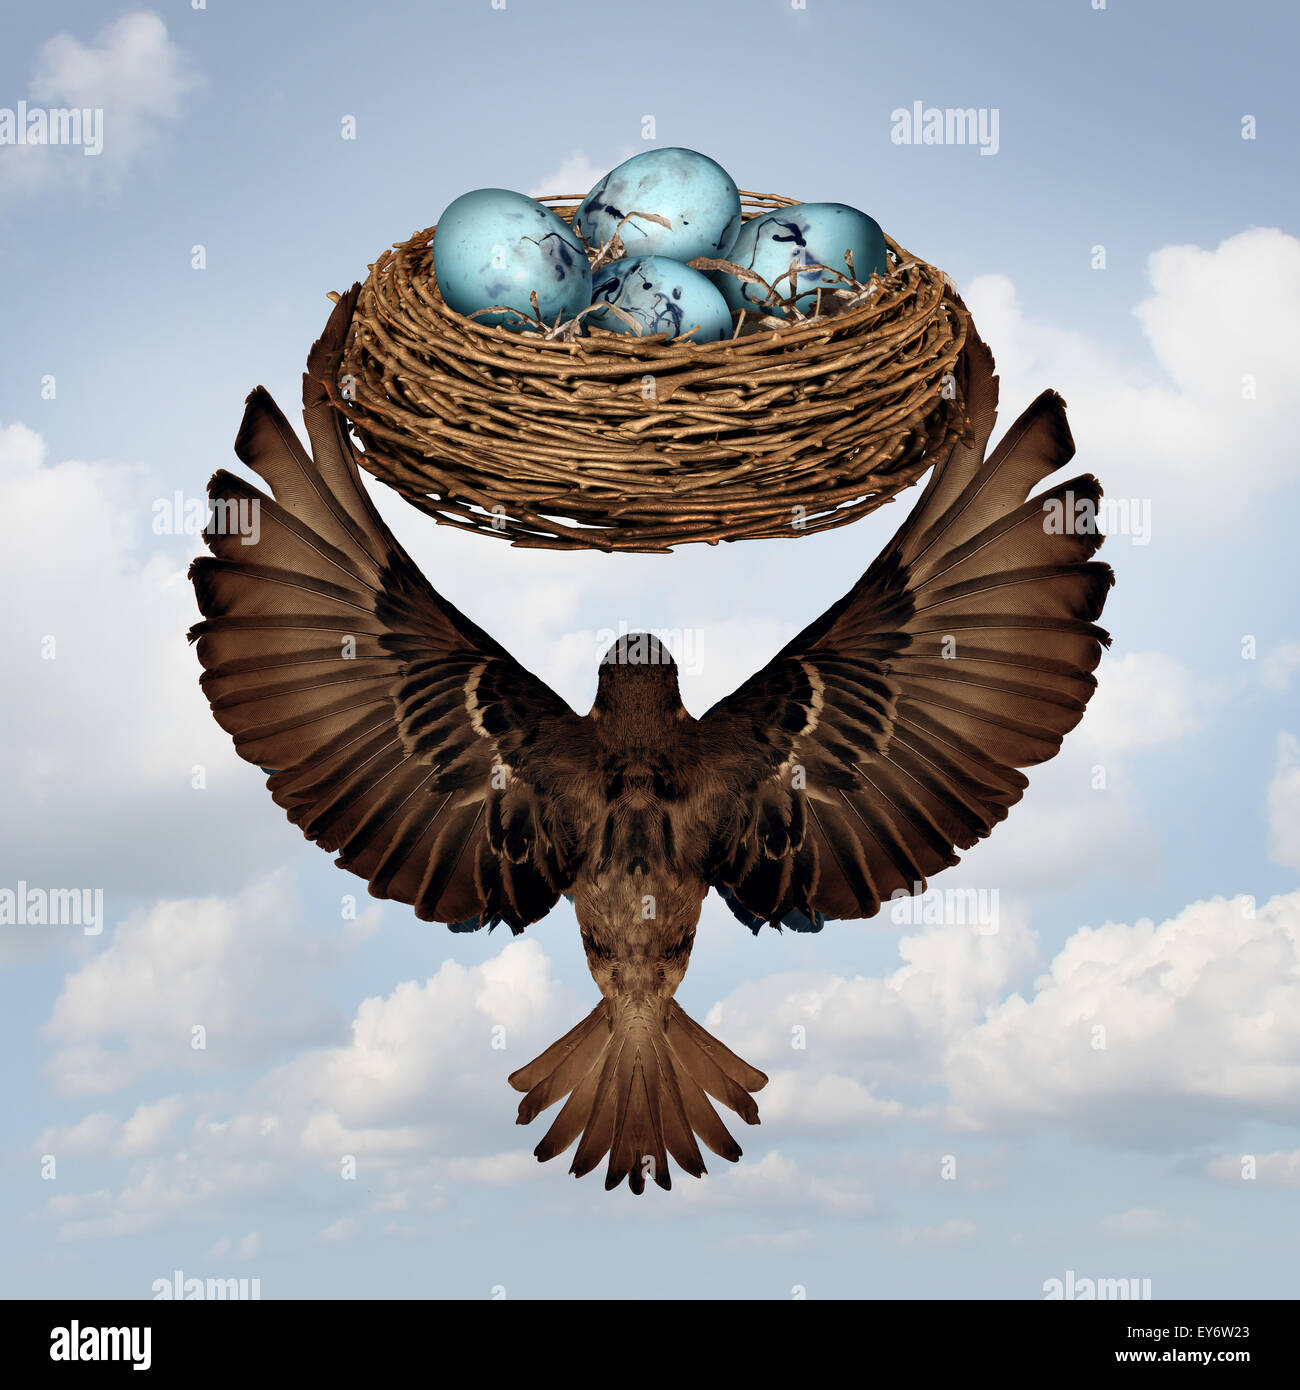 Home moving concept and relocating real estate metaphor as a mother or father parent bird transporting a nest full of eggs for a change in neighborhood or business idea for changing or relocate an investment to a safer location. Stock Photo